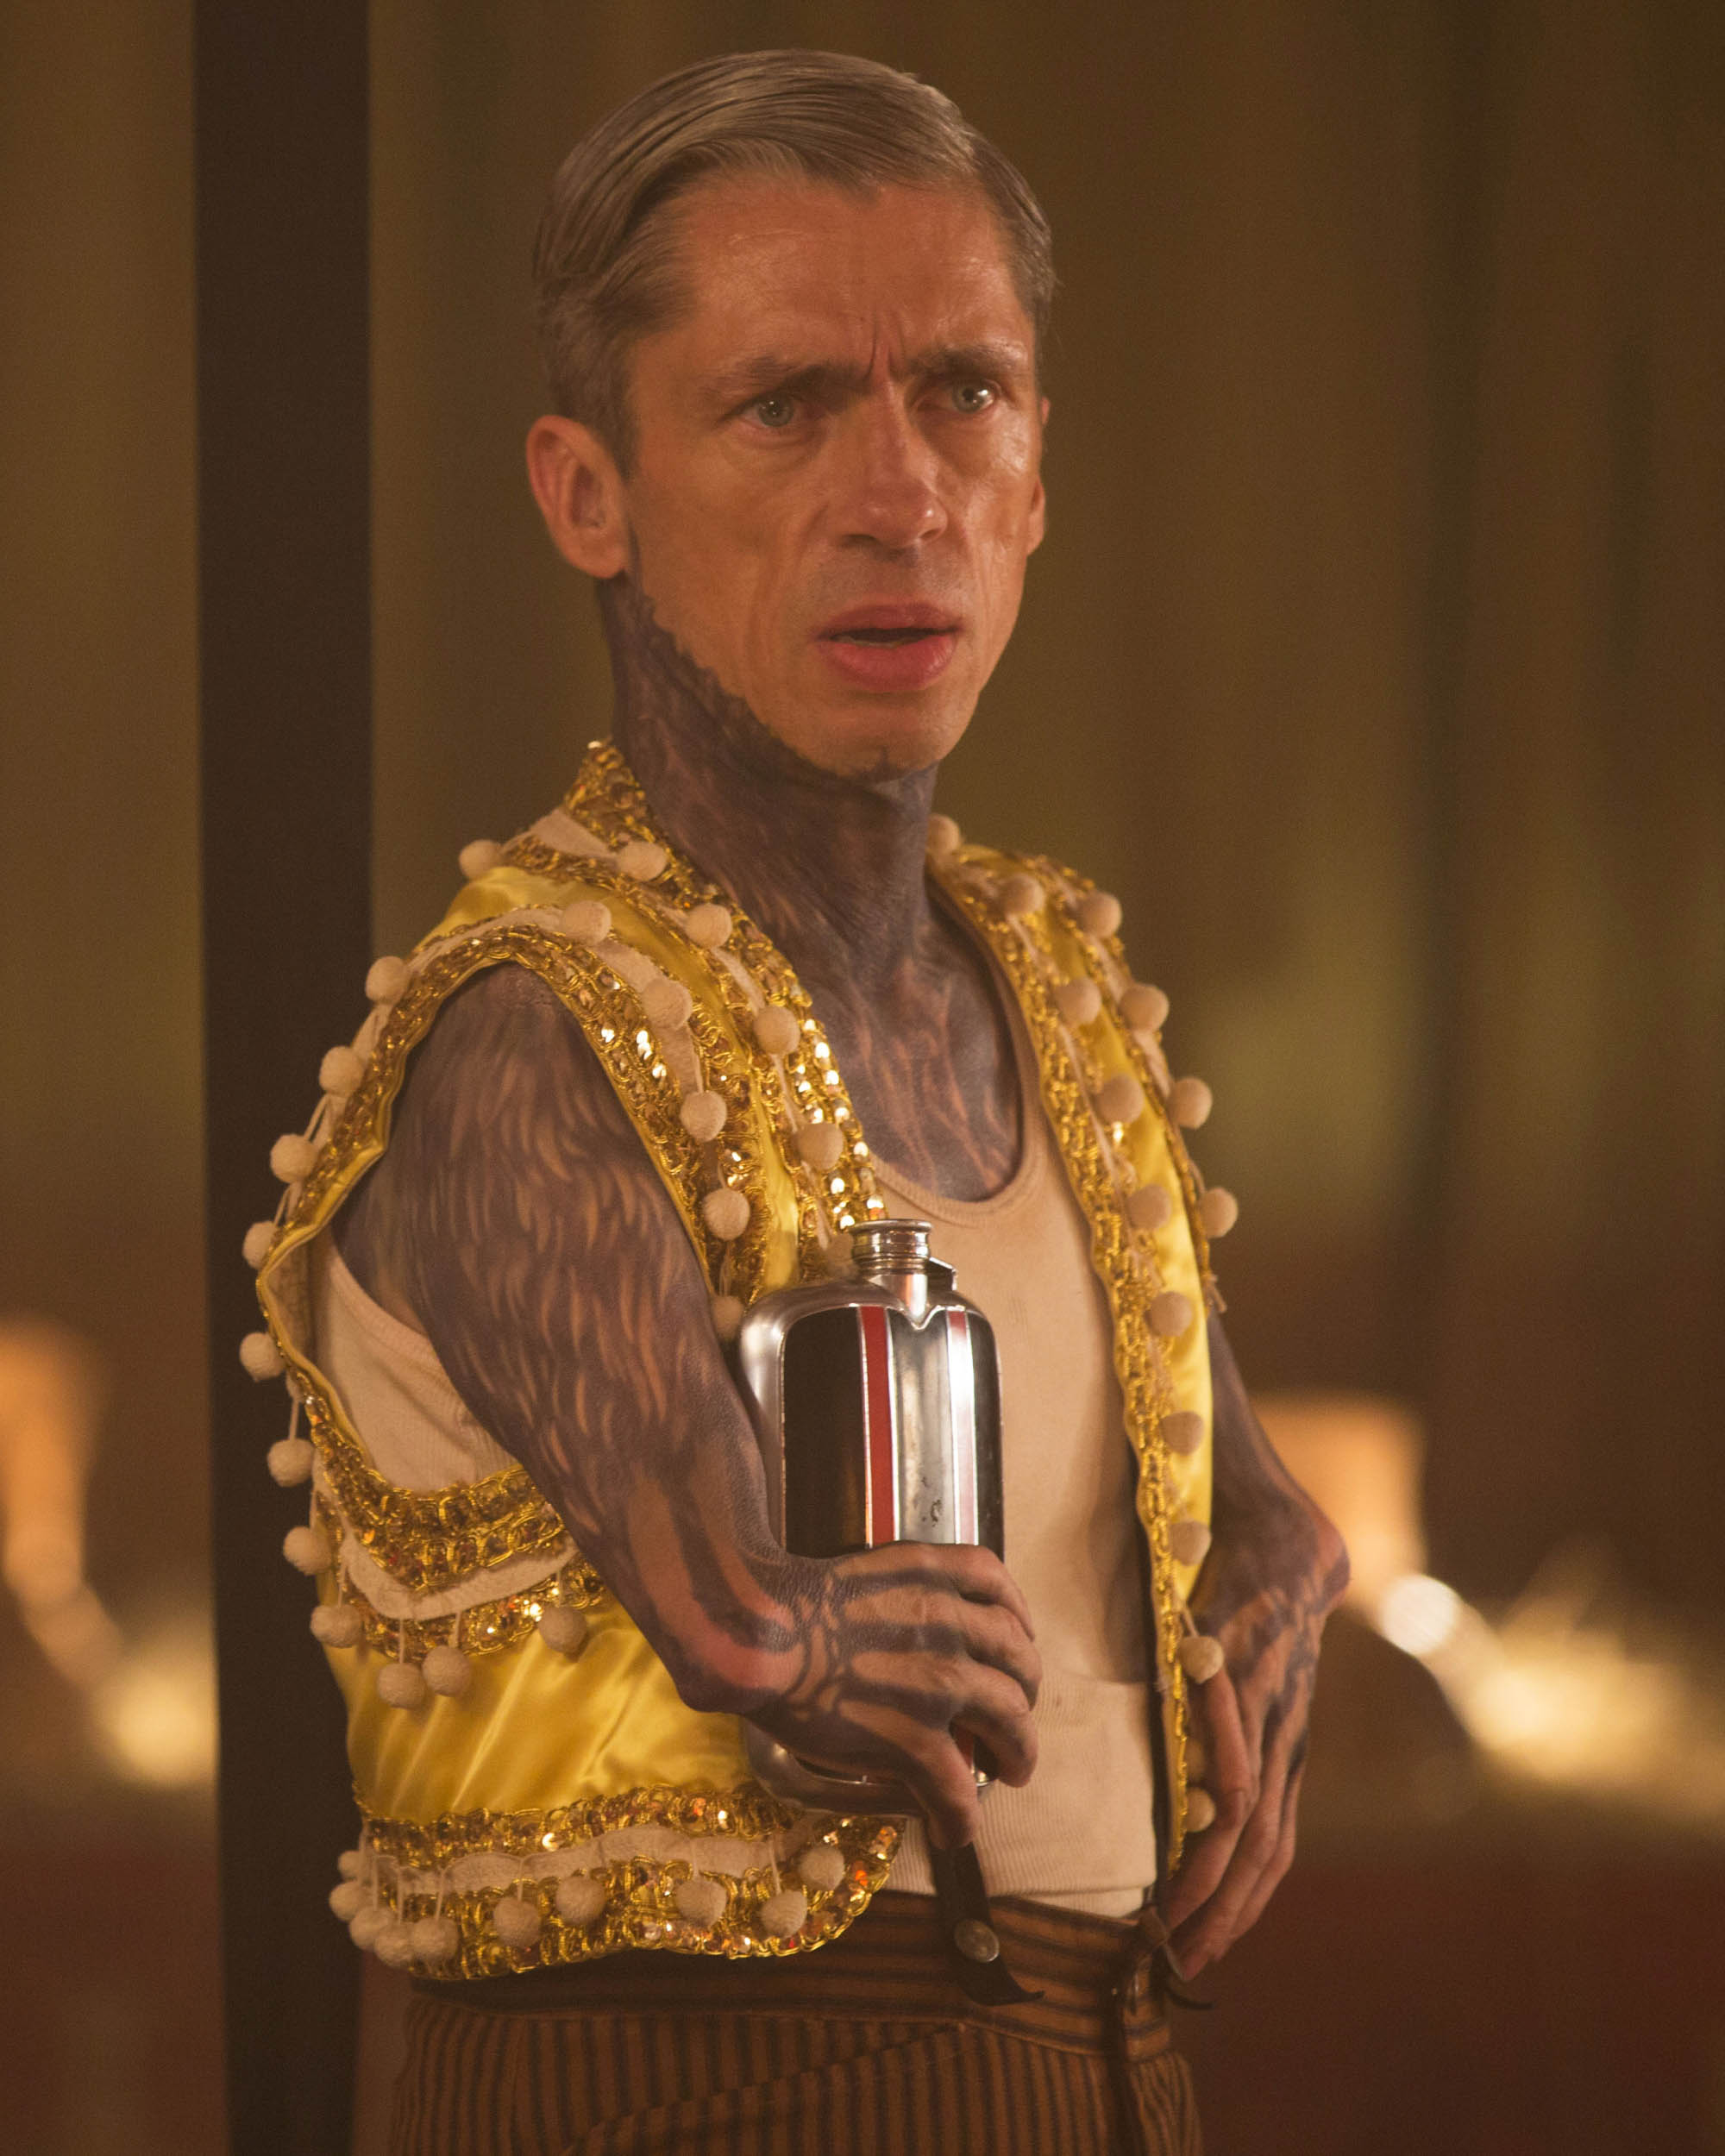 Fraser plays as Paul the Illustrated Seal in American Horror Story: Freak Show.